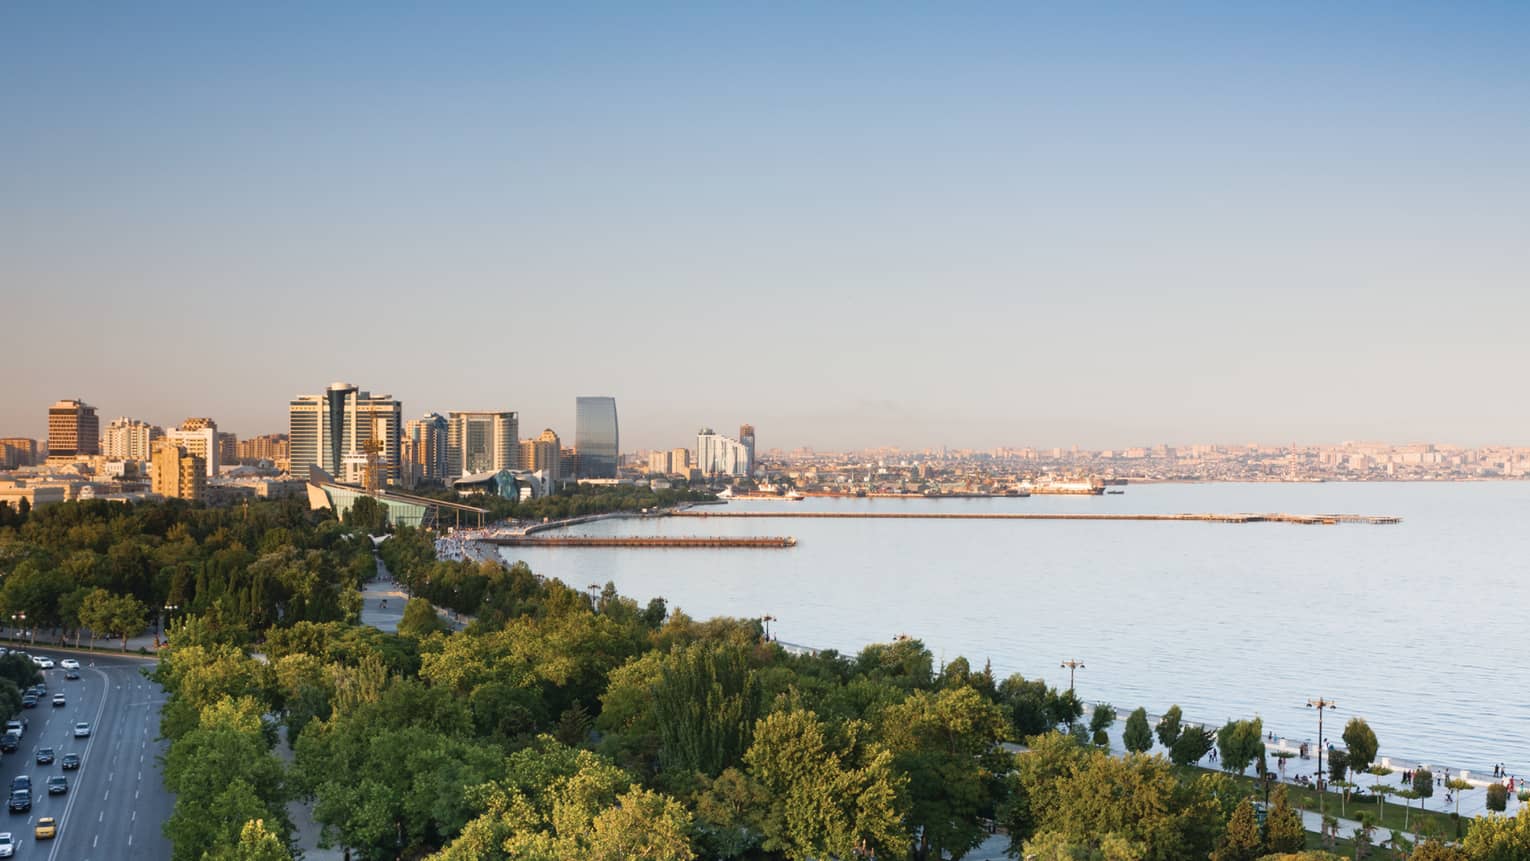 Aerial view of Baku skyline during the day with canopy of trees, high rise buildings, Caspian Sea